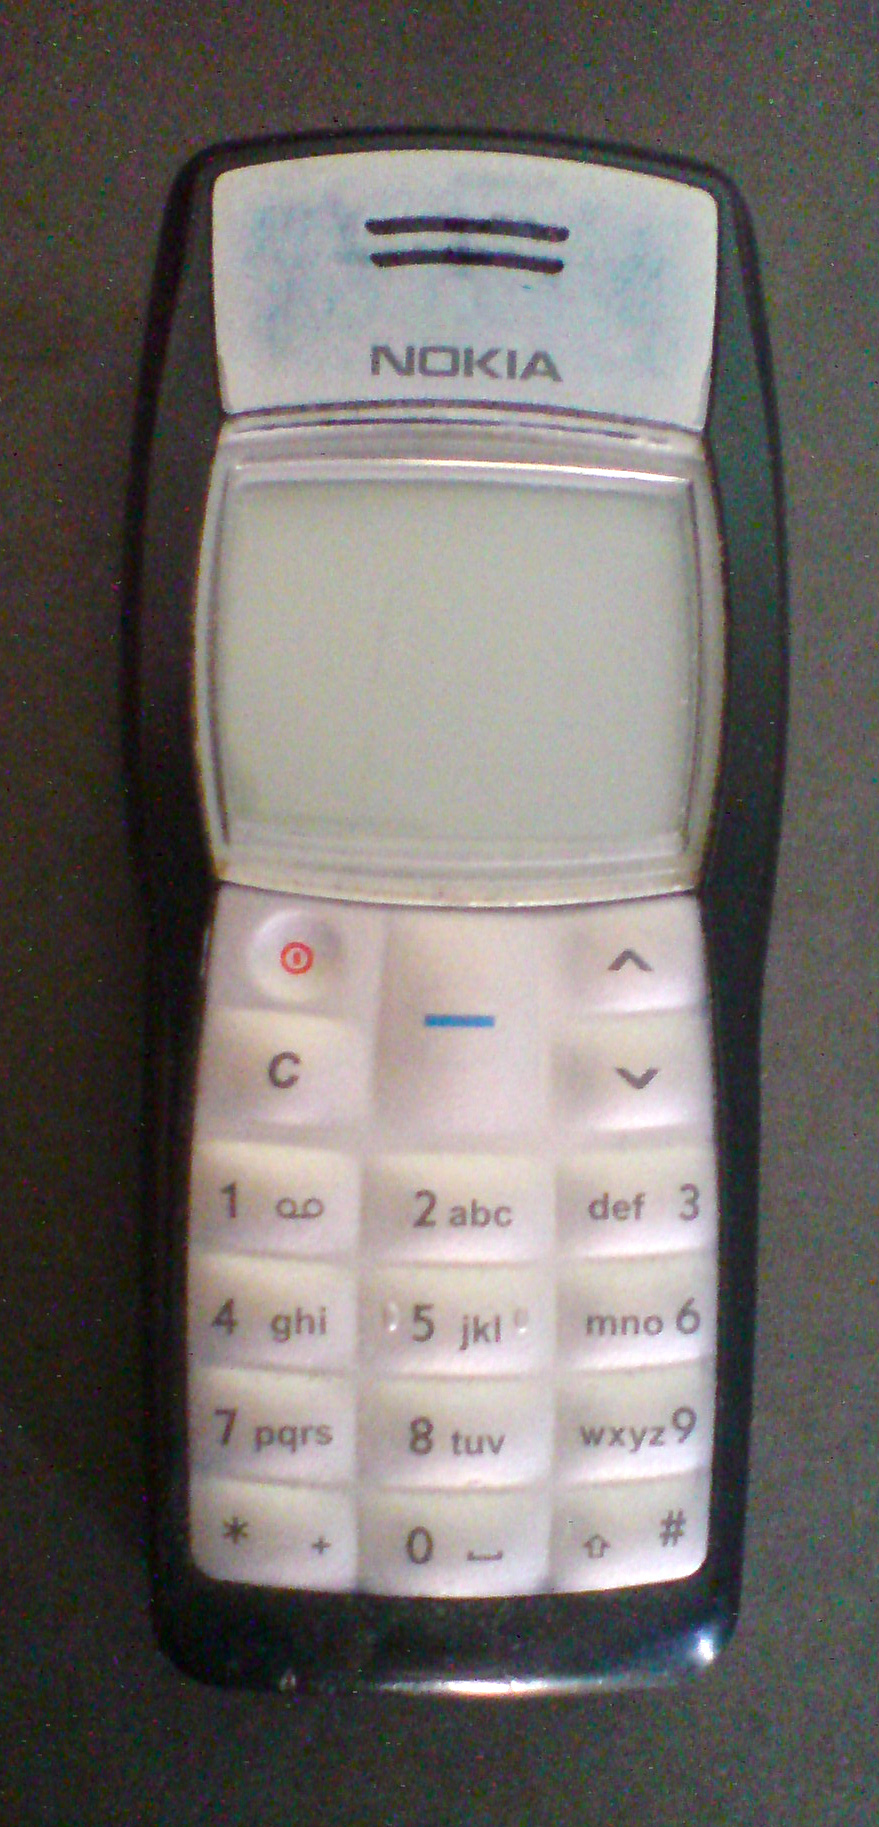 A very old Nokia 1100